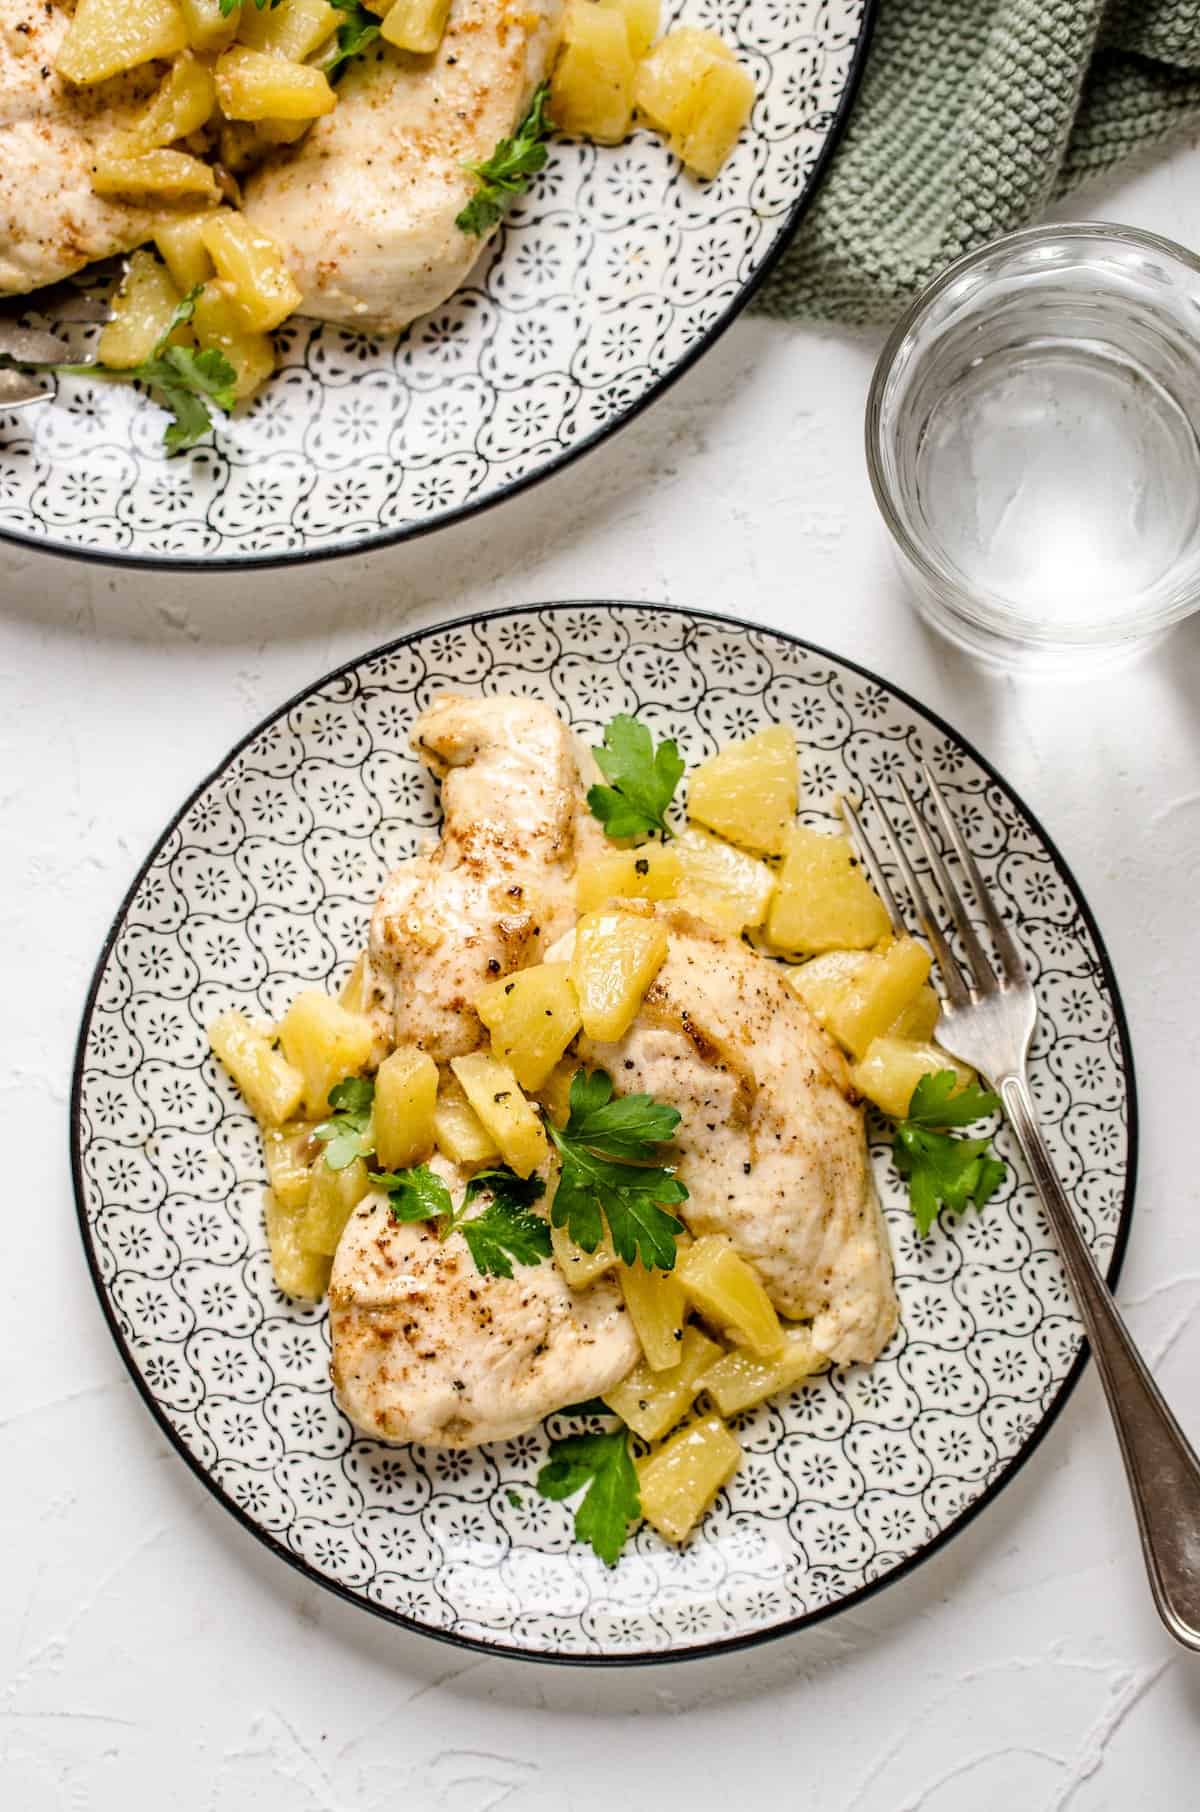 Two platefuls of Hawaiian baked chicken served with a pineapple topping.